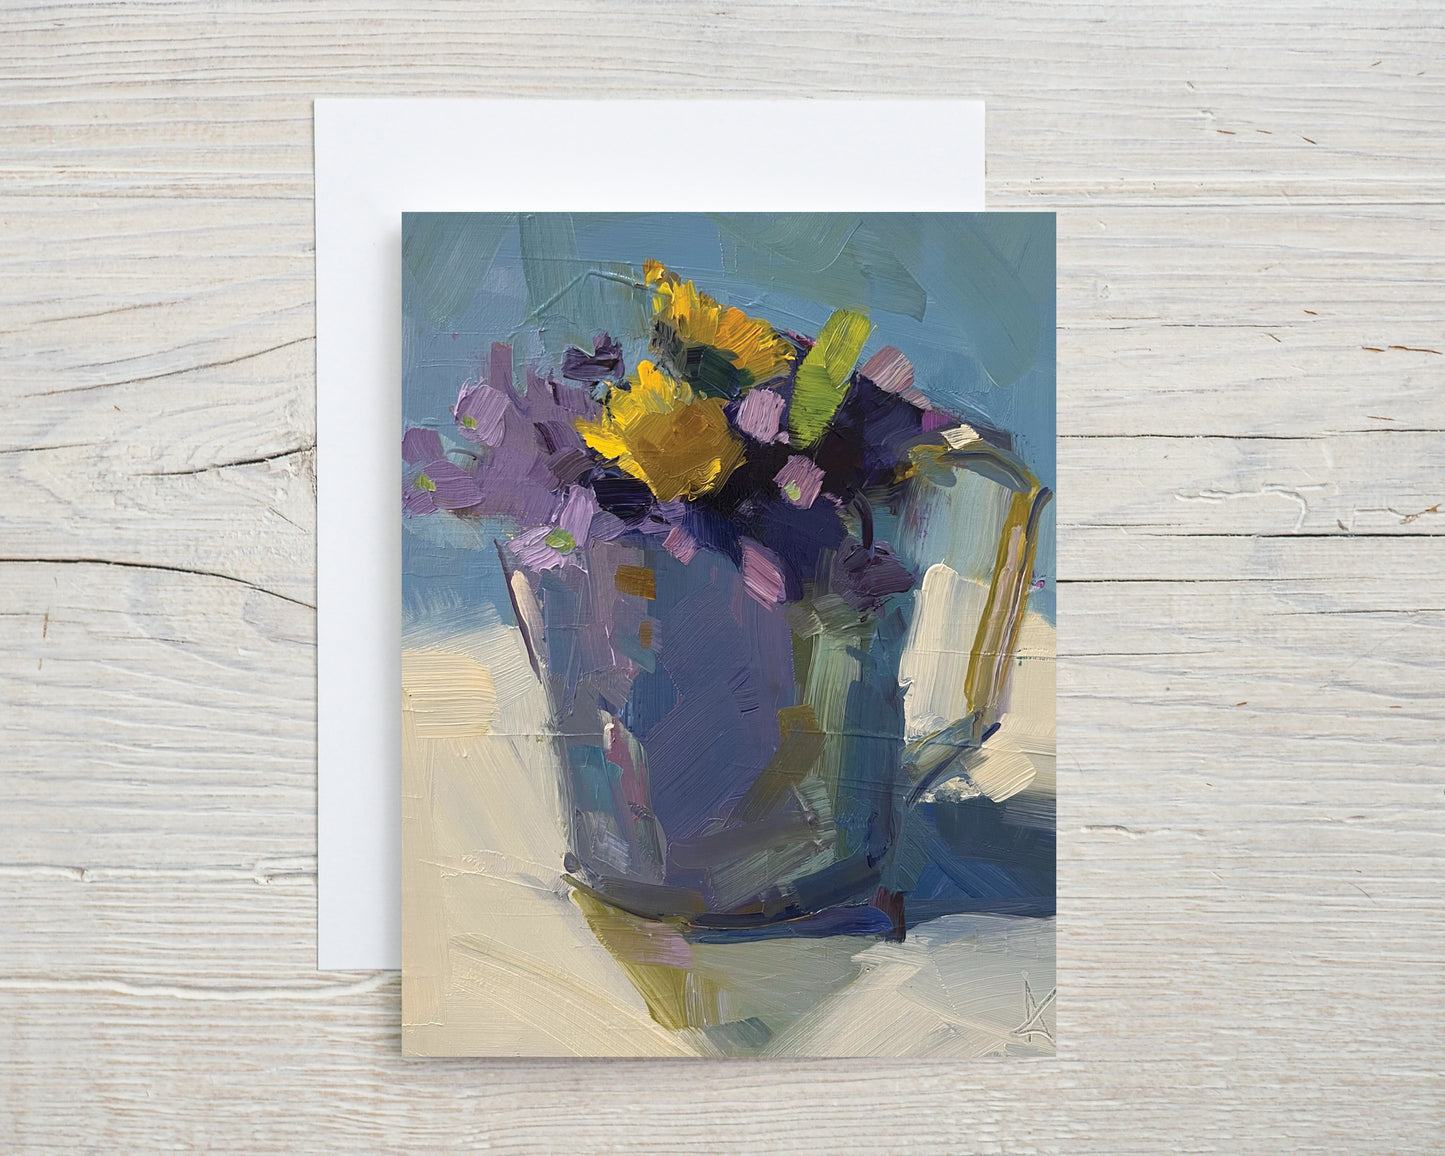 NEW Violets and Dandelions in a Tin Cup, Set of 8 notecards and envelopes